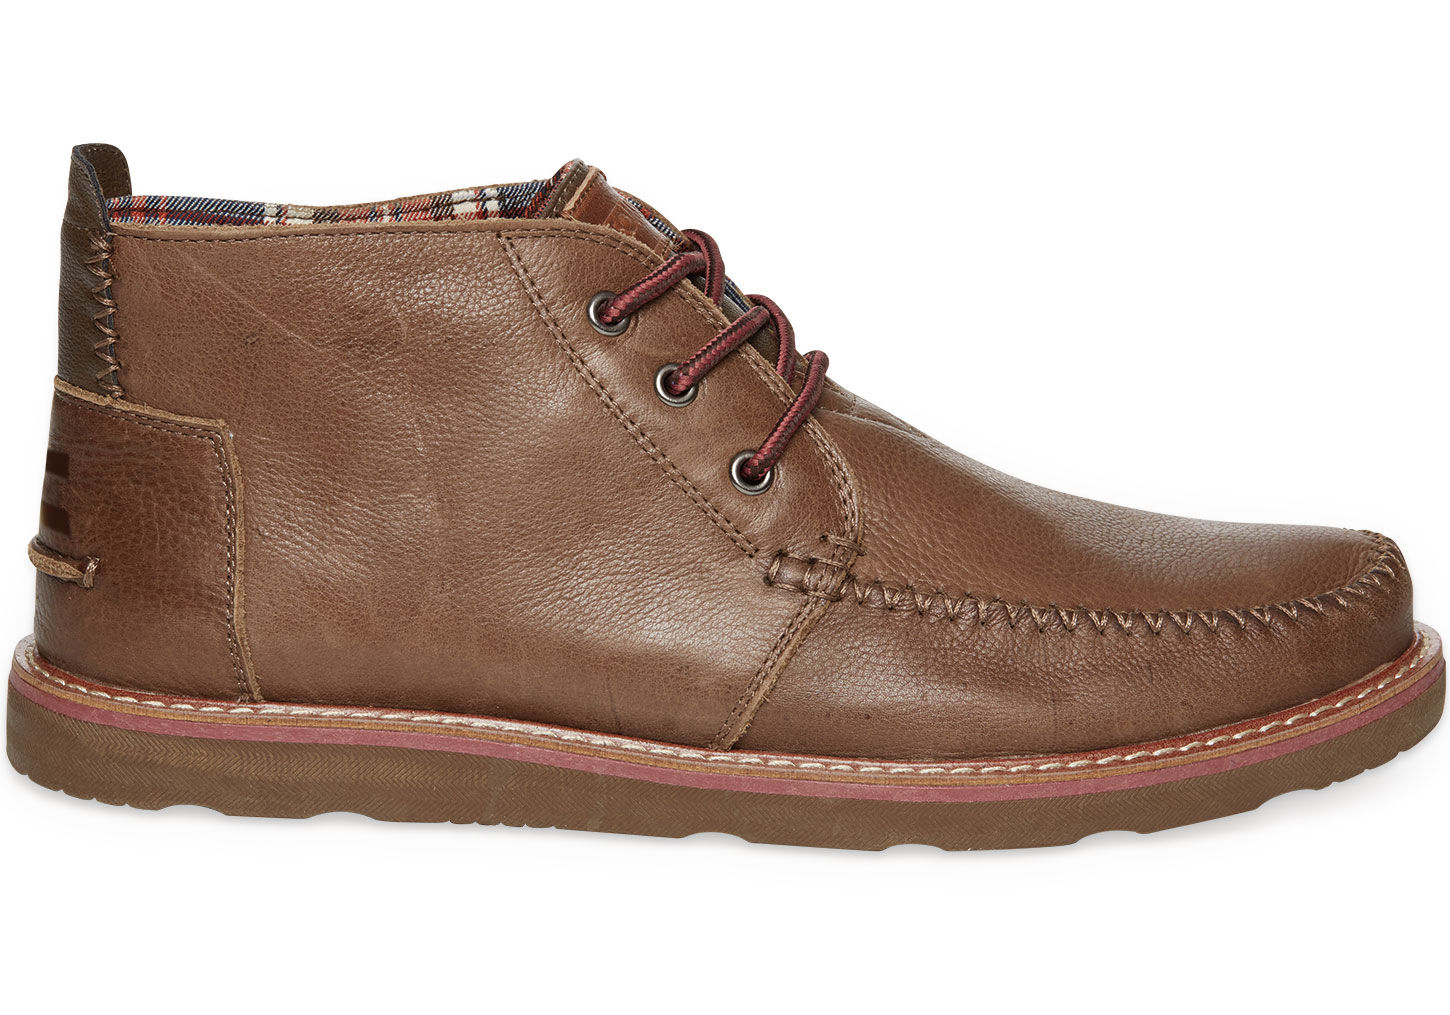 Lyst - Toms Chocolate Leather Men'S Chukka Boots in Brown for Men